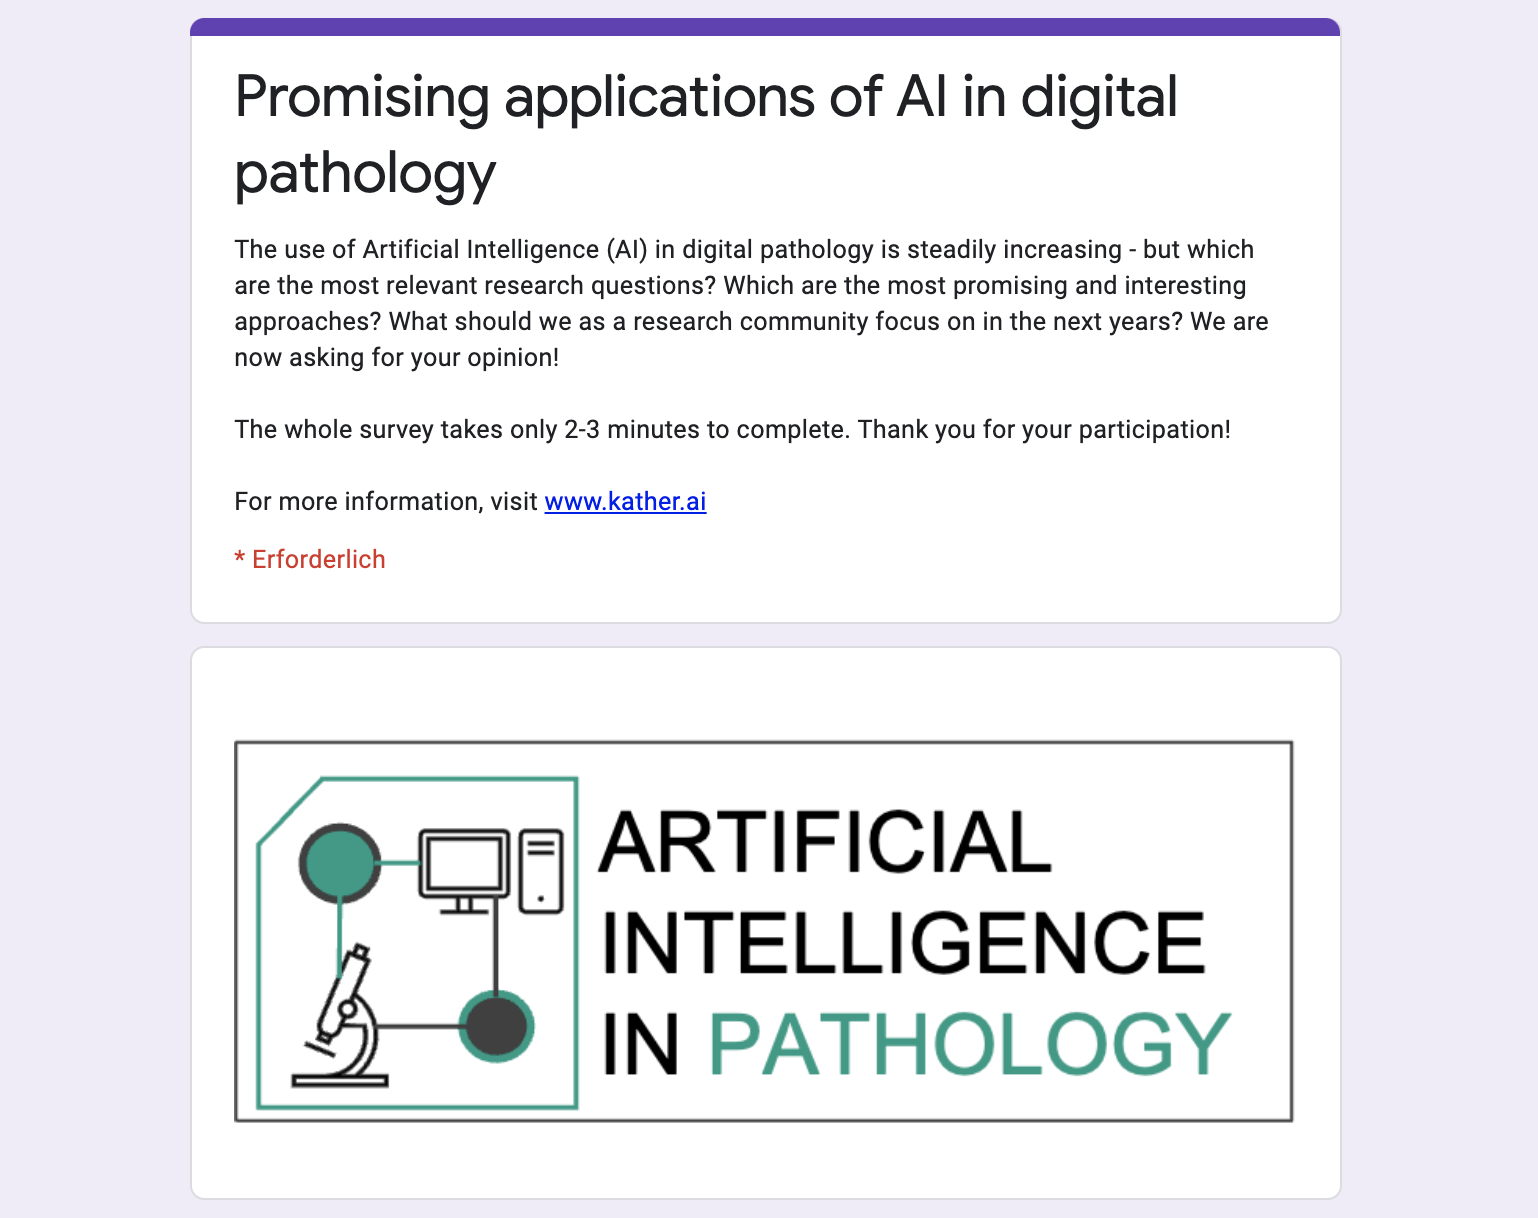 image from Survey on AI applications in pathology